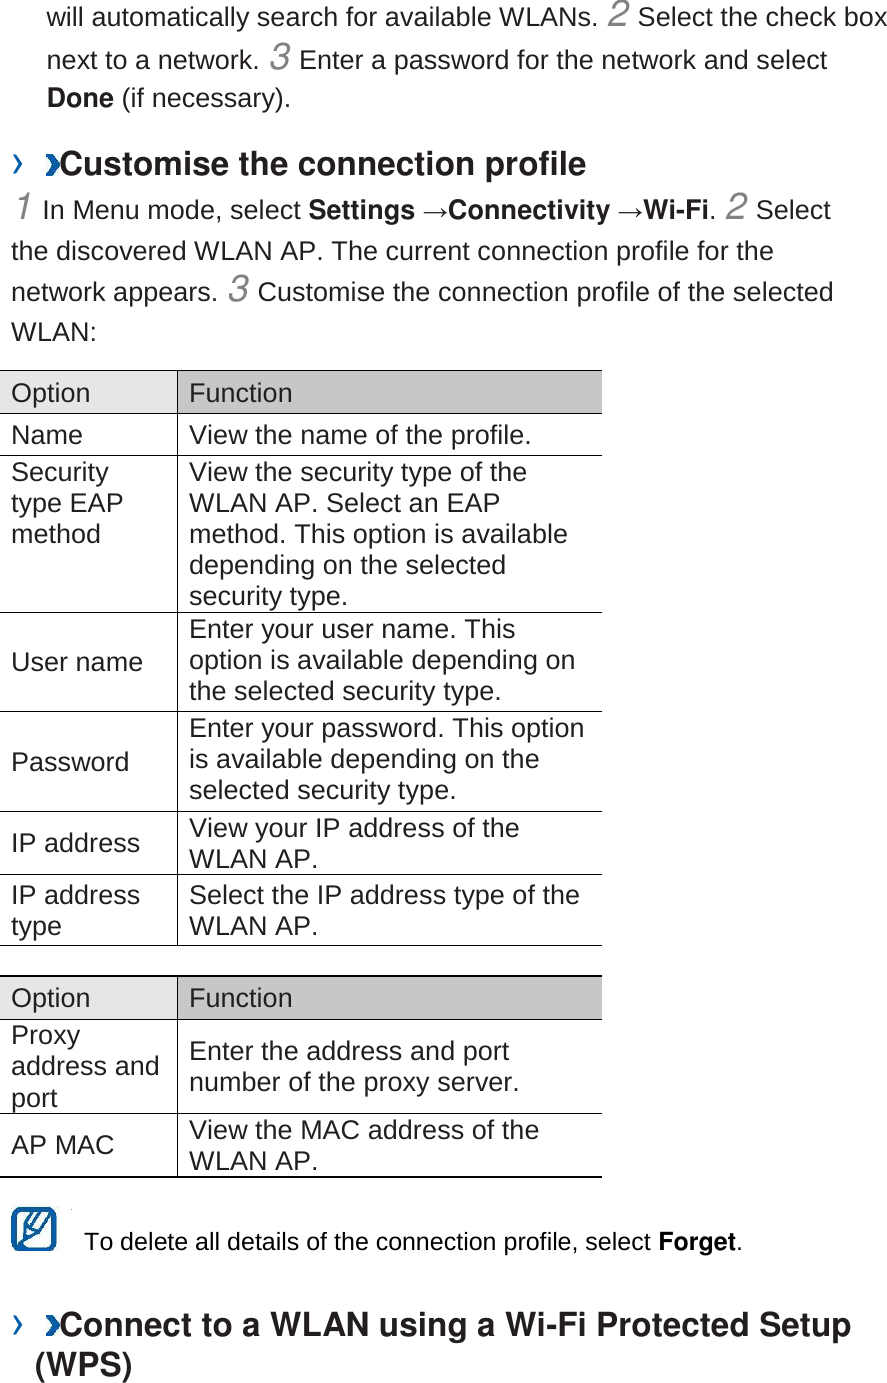 will automatically search for available WLANs. 2 Select the check box next to a network. 3 Enter a password for the network and select Done (if necessary).   ›  Customise the connection profile   1 In Menu mode, select Settings →Connectivity →Wi-Fi. 2 Select the discovered WLAN AP. The current connection profile for the network appears. 3 Customise the connection profile of the selected WLAN:   Option   Function   Name   View the name of the profile.   Security type EAP method   View the security type of the WLAN AP. Select an EAP method. This option is available depending on the selected security type.   User name   Enter your user name. This option is available depending on the selected security type.   Password   Enter your password. This option is available depending on the selected security type.   IP address   View your IP address of the WLAN AP.   IP address type   Select the IP address type of the WLAN AP.    Option   Function   Proxy address and port   Enter the address and port number of the proxy server.   AP MAC   View the MAC address of the WLAN AP.      To delete all details of the connection profile, select Forget.   ›  Connect to a WLAN using a Wi-Fi Protected Setup (WPS)   